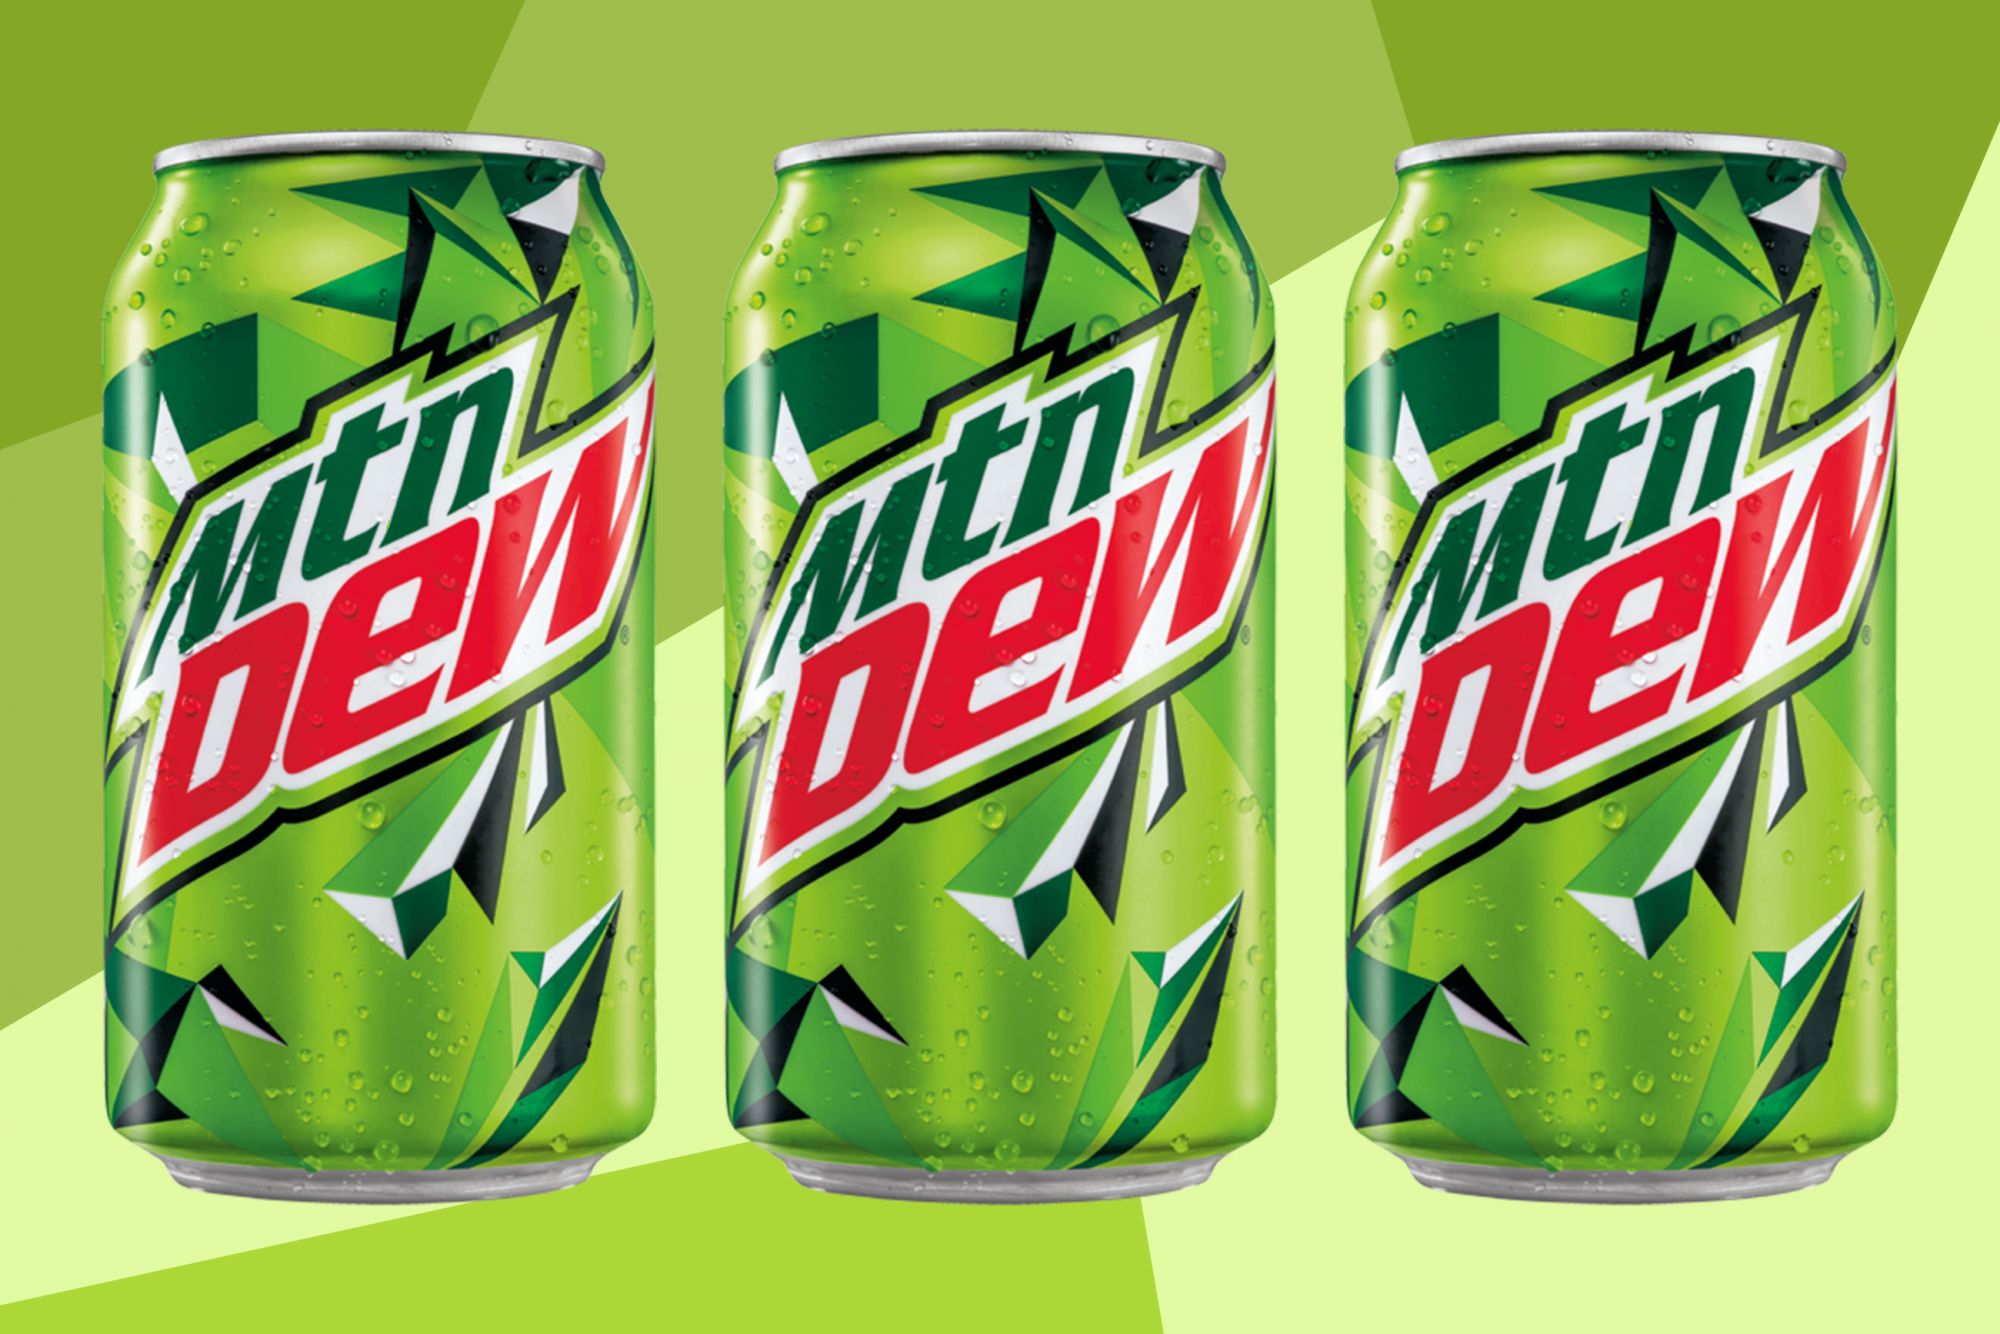 The Pepsi-Cola company once responded to a man who claimed to have found a mouse in his can of Mountain Dew, stating that due to the high concentration of citric acid, any biological remains left in a can from the canning to consumption time frame would be dissolved before opening. -u/IWasToldYouHadPie